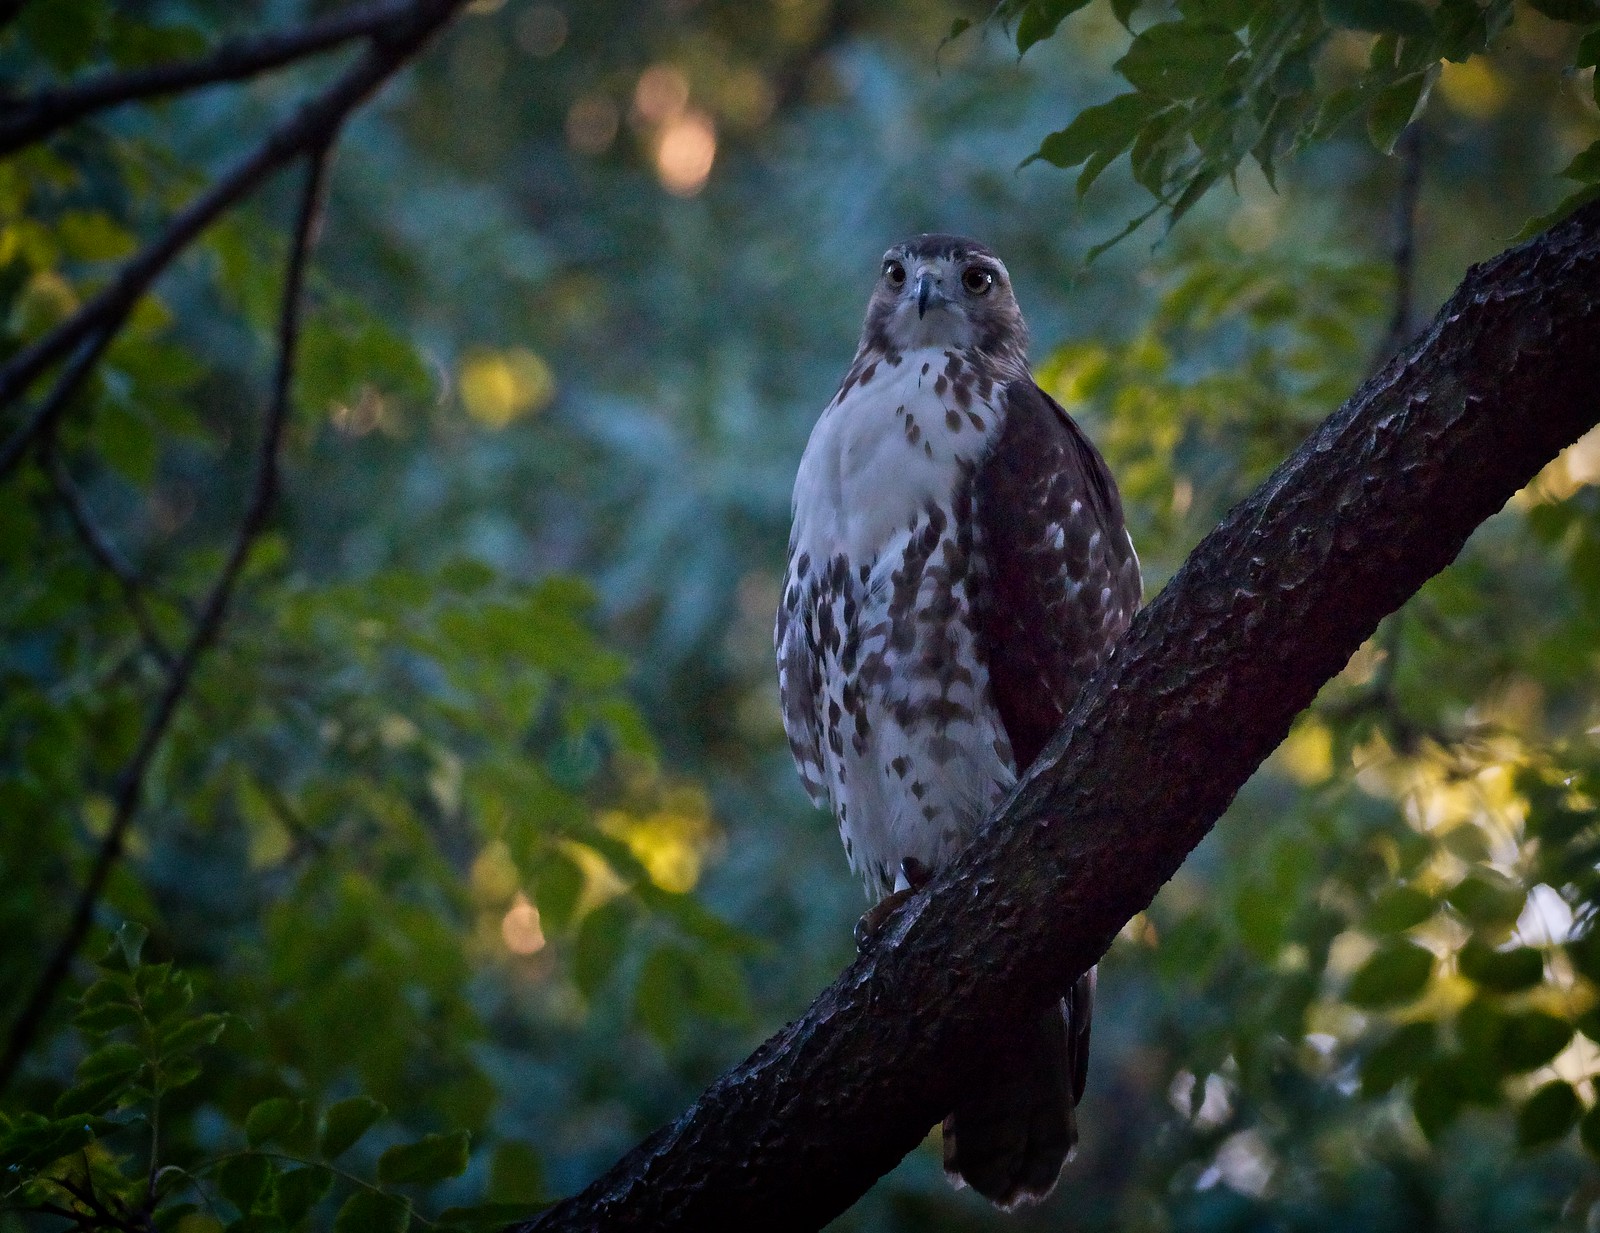 Immature red-tail in the Shakespeare Garden